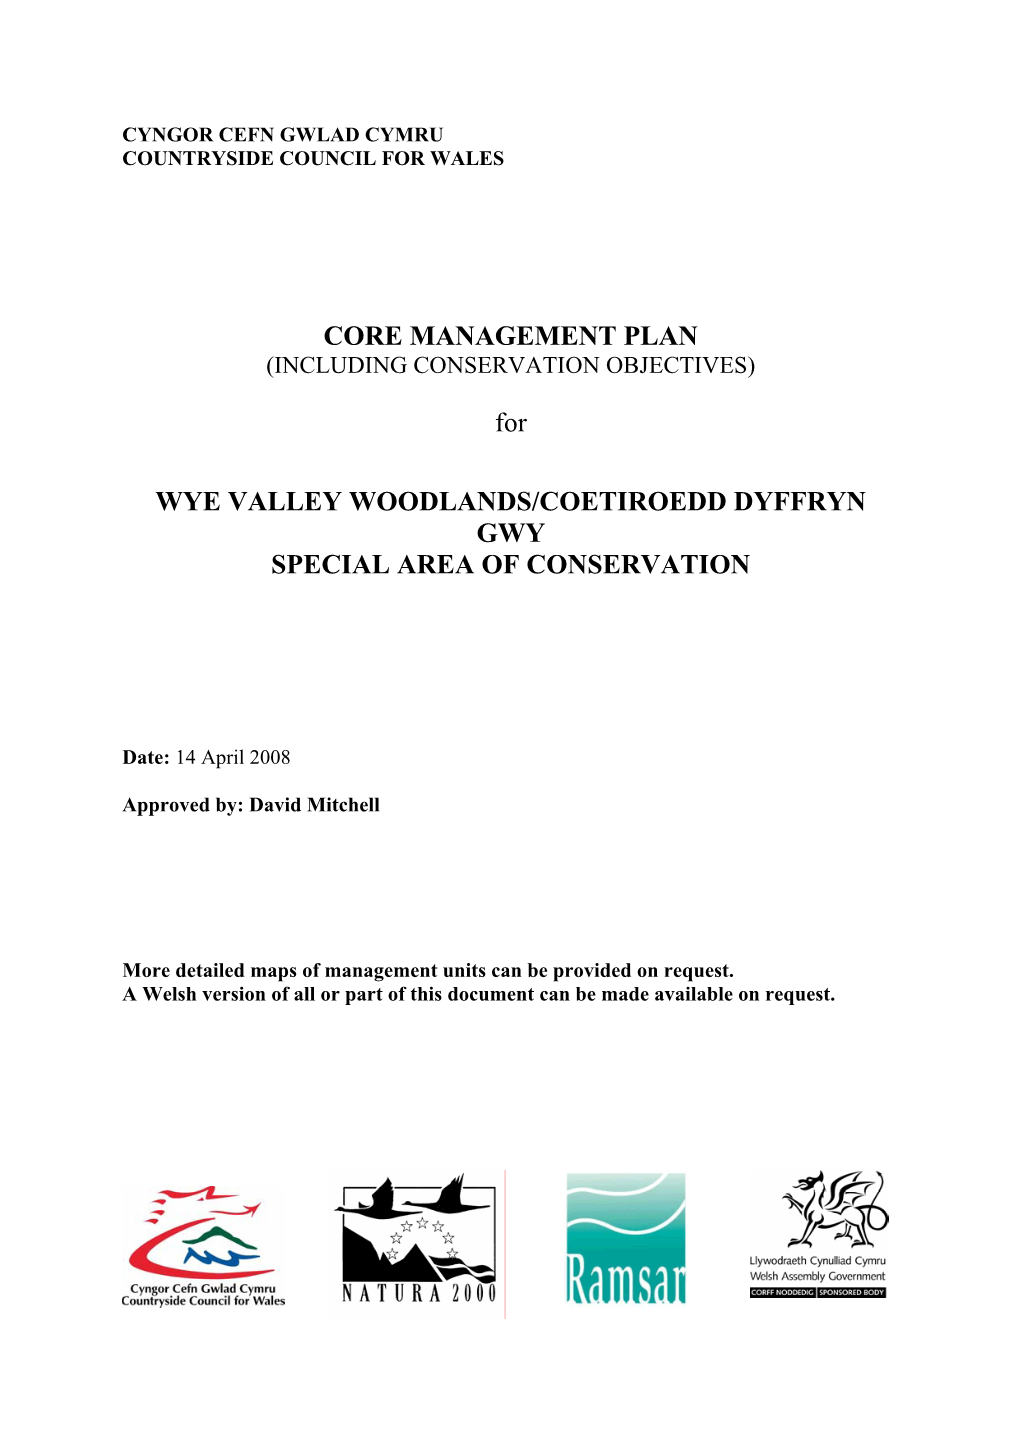 CORE MANAGEMENT PLAN for WYE VALLEY WOODLANDS